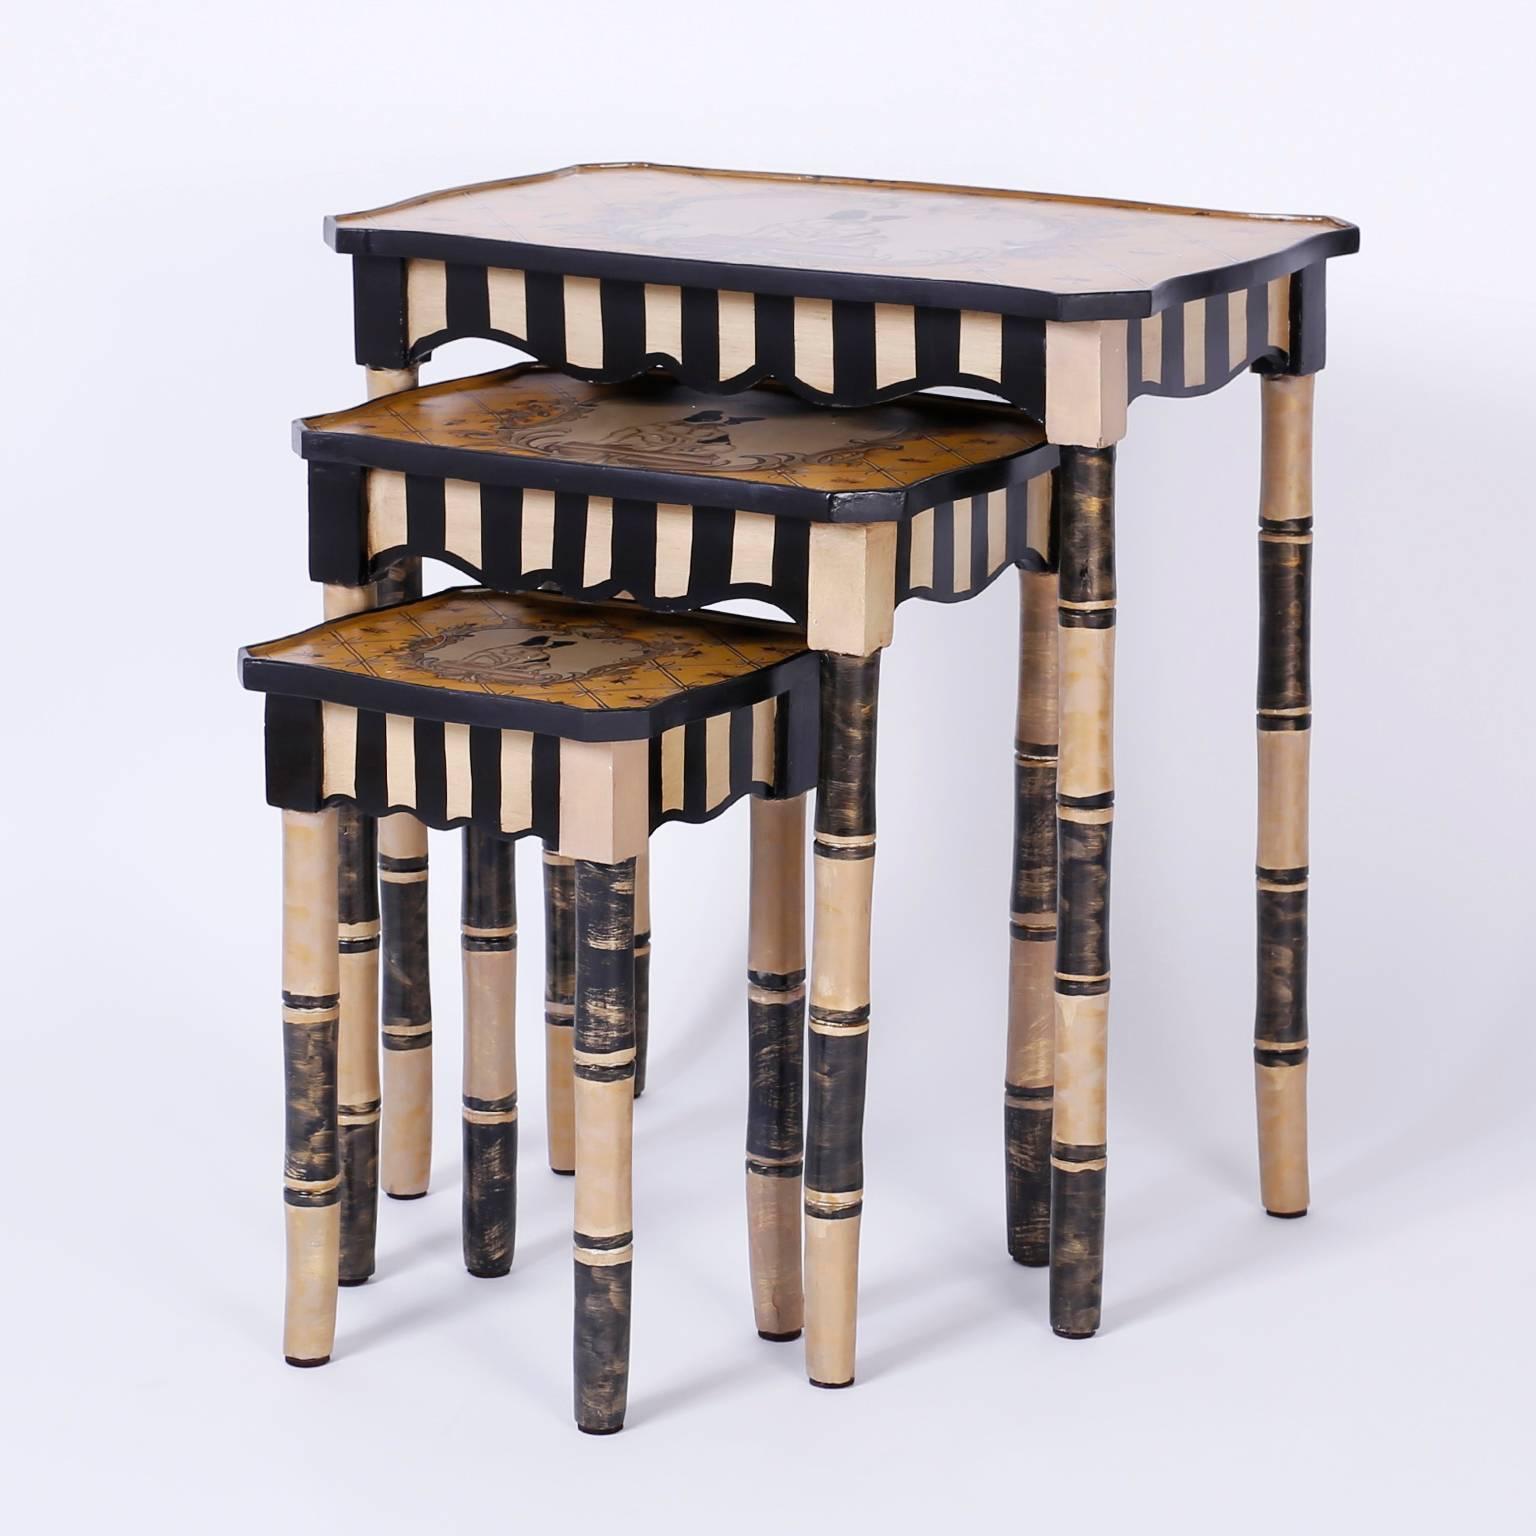 Whimsical nest of tables crafted in wood having hand-painted dogs or Boston Terriers in a center cartouche surrounded by flowers and bees in a yellow background. The striped, turned legs add to the merriment.

Dimensions of tables, largest to